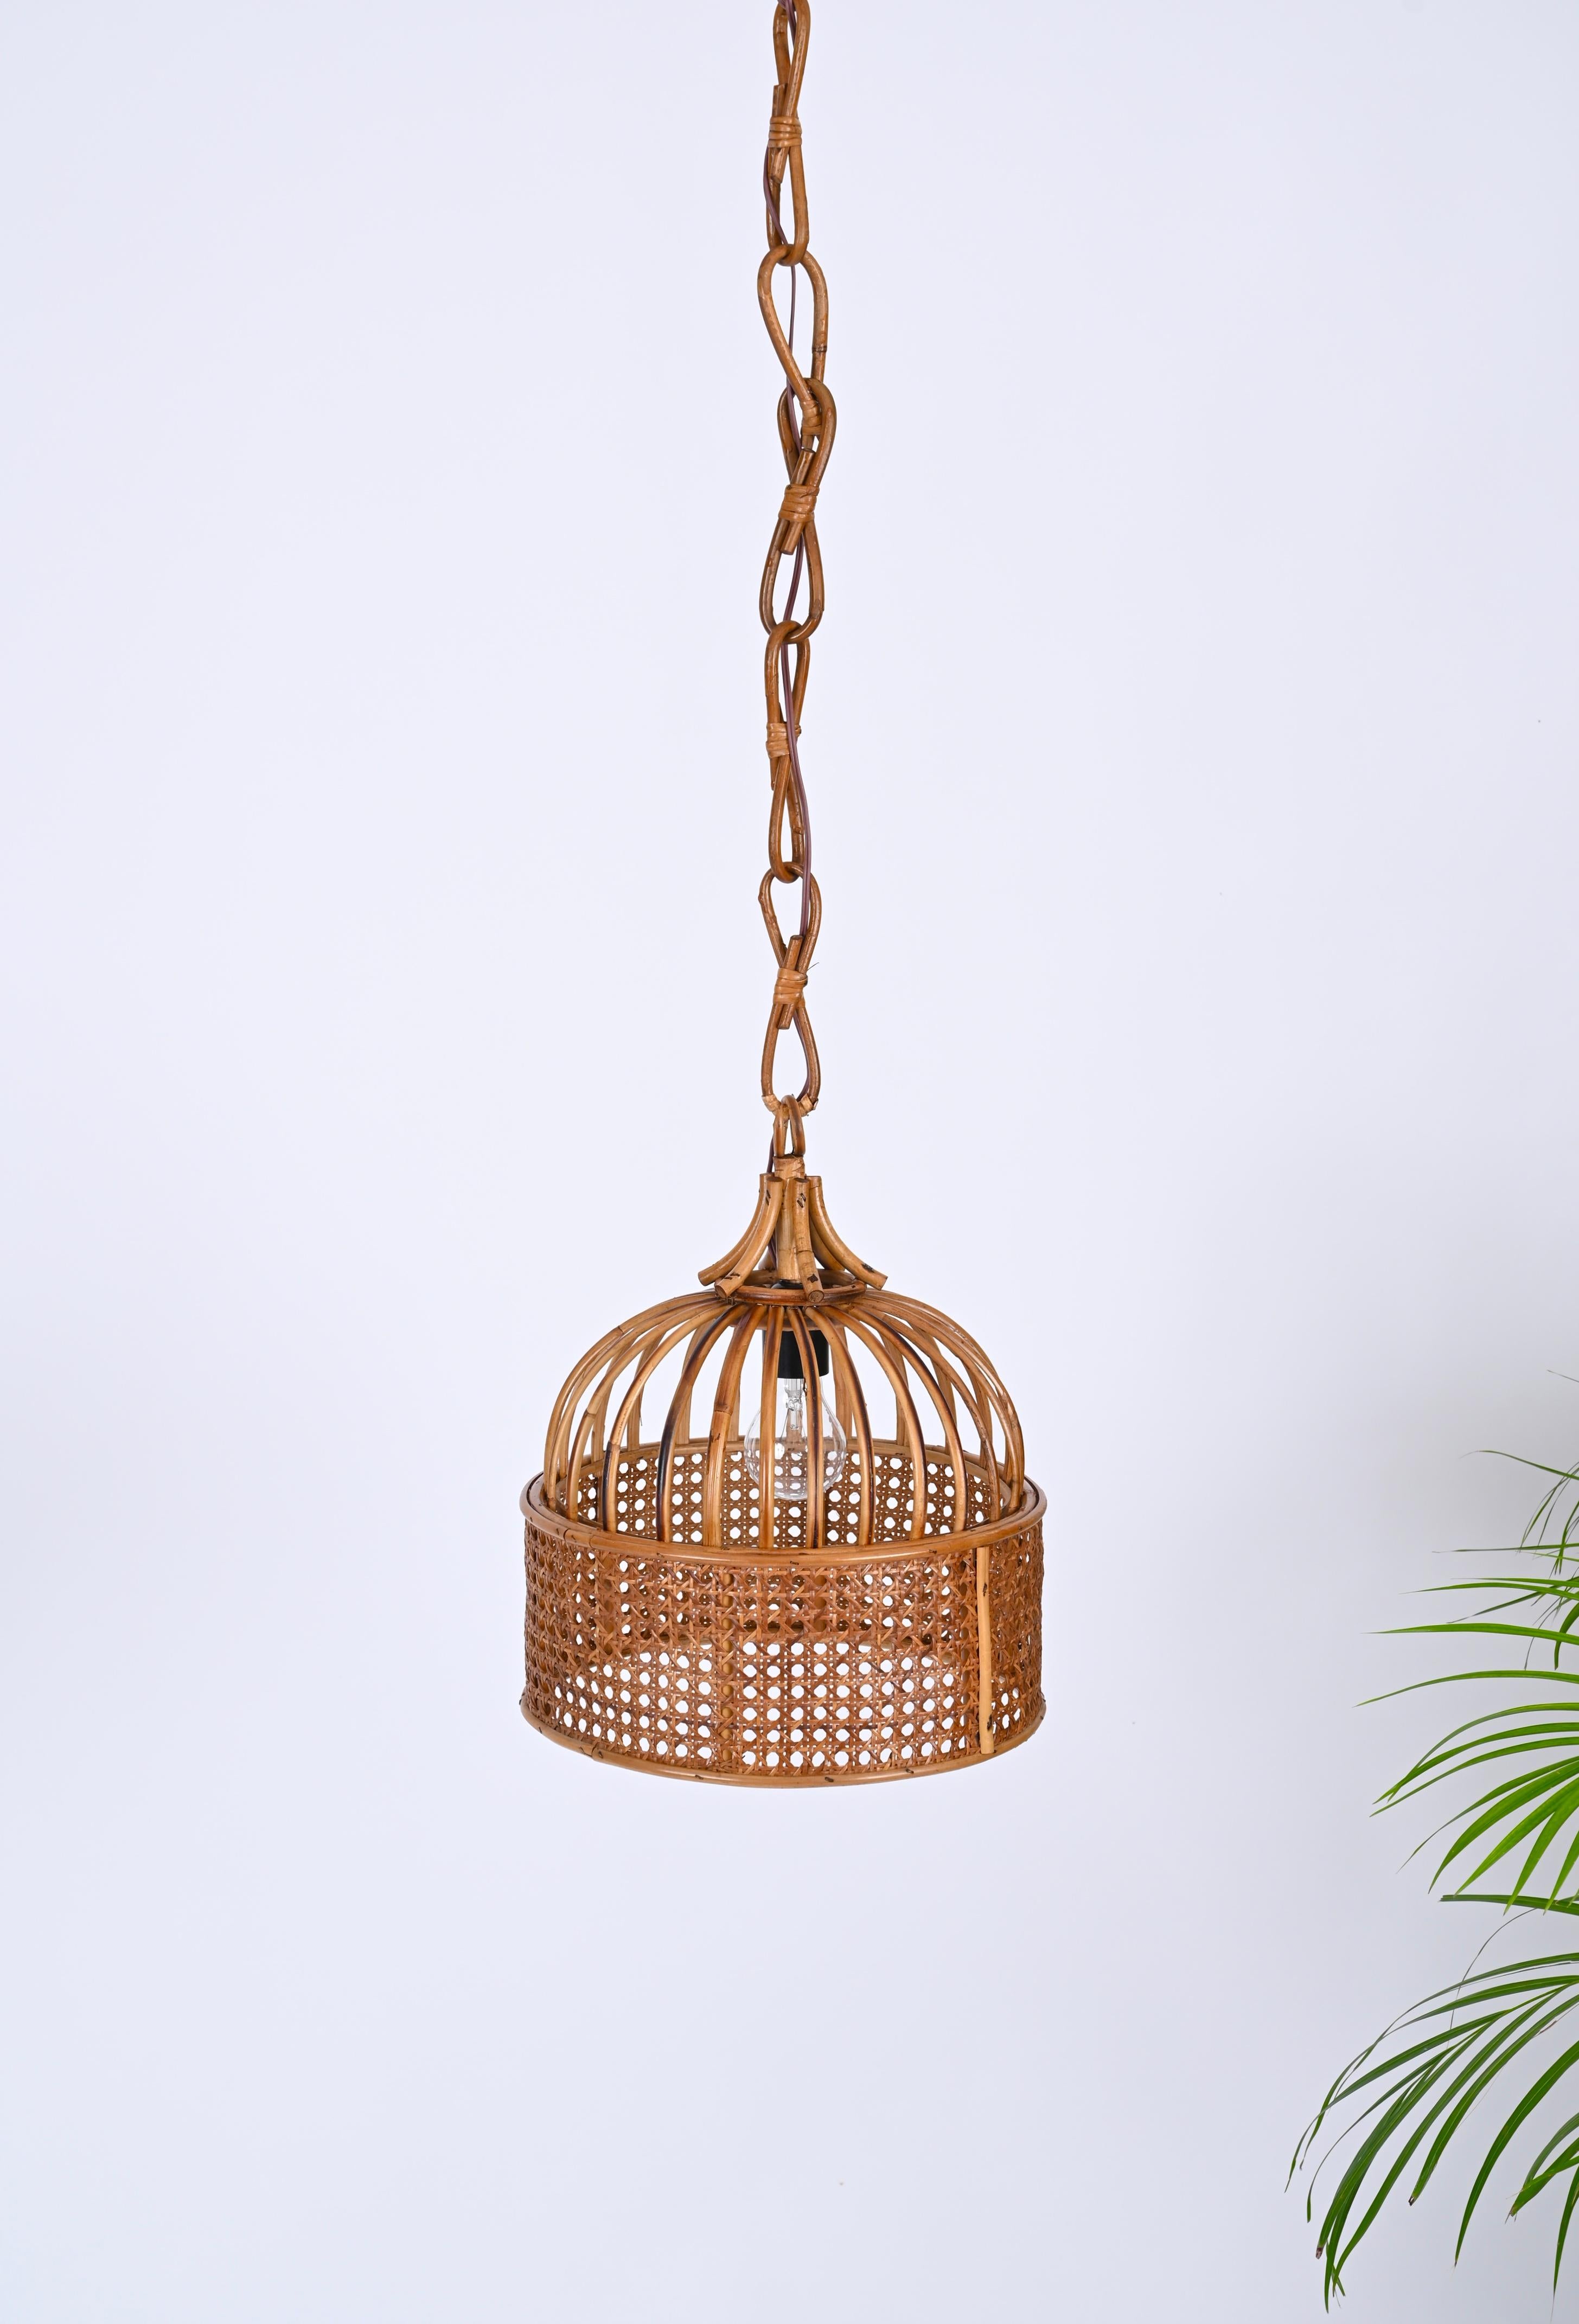 Midcentury French Riviera Round Pendant in Rattan and Wicker, Italy 1970s For Sale 3